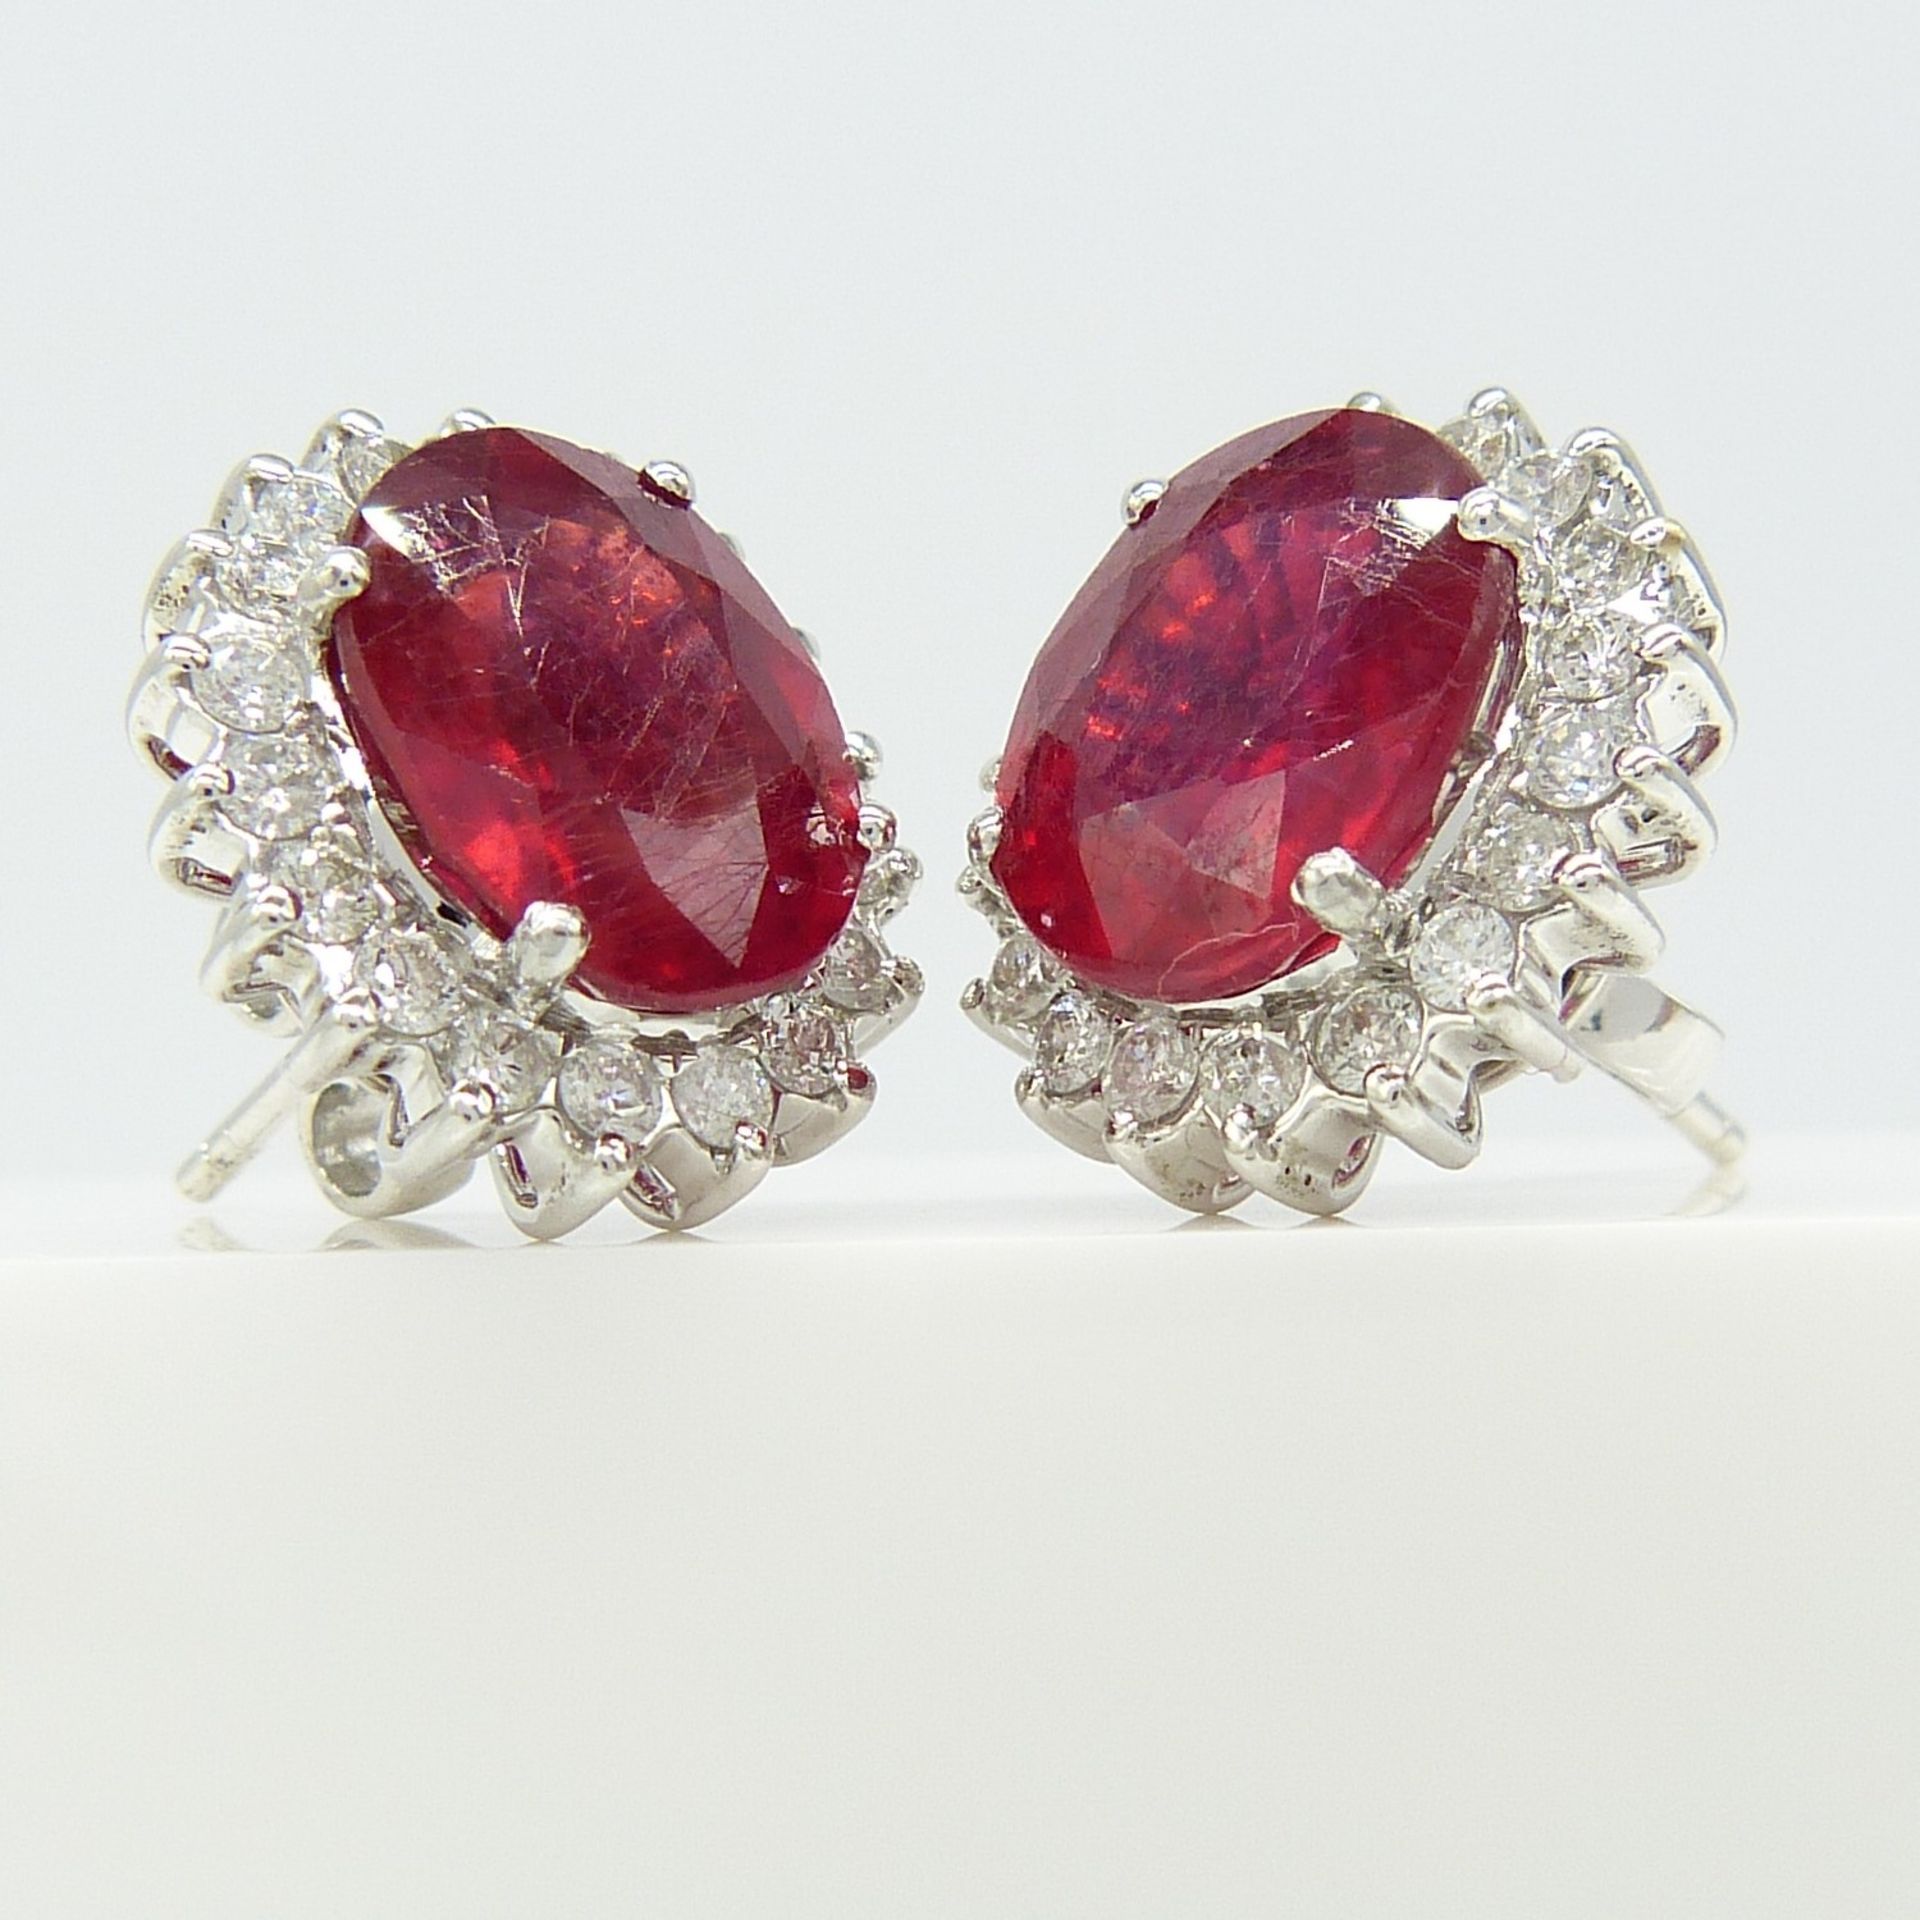 7.50 Carat Ruby and Diamond Cluster Earrings In 18ct White Gold, Boxed